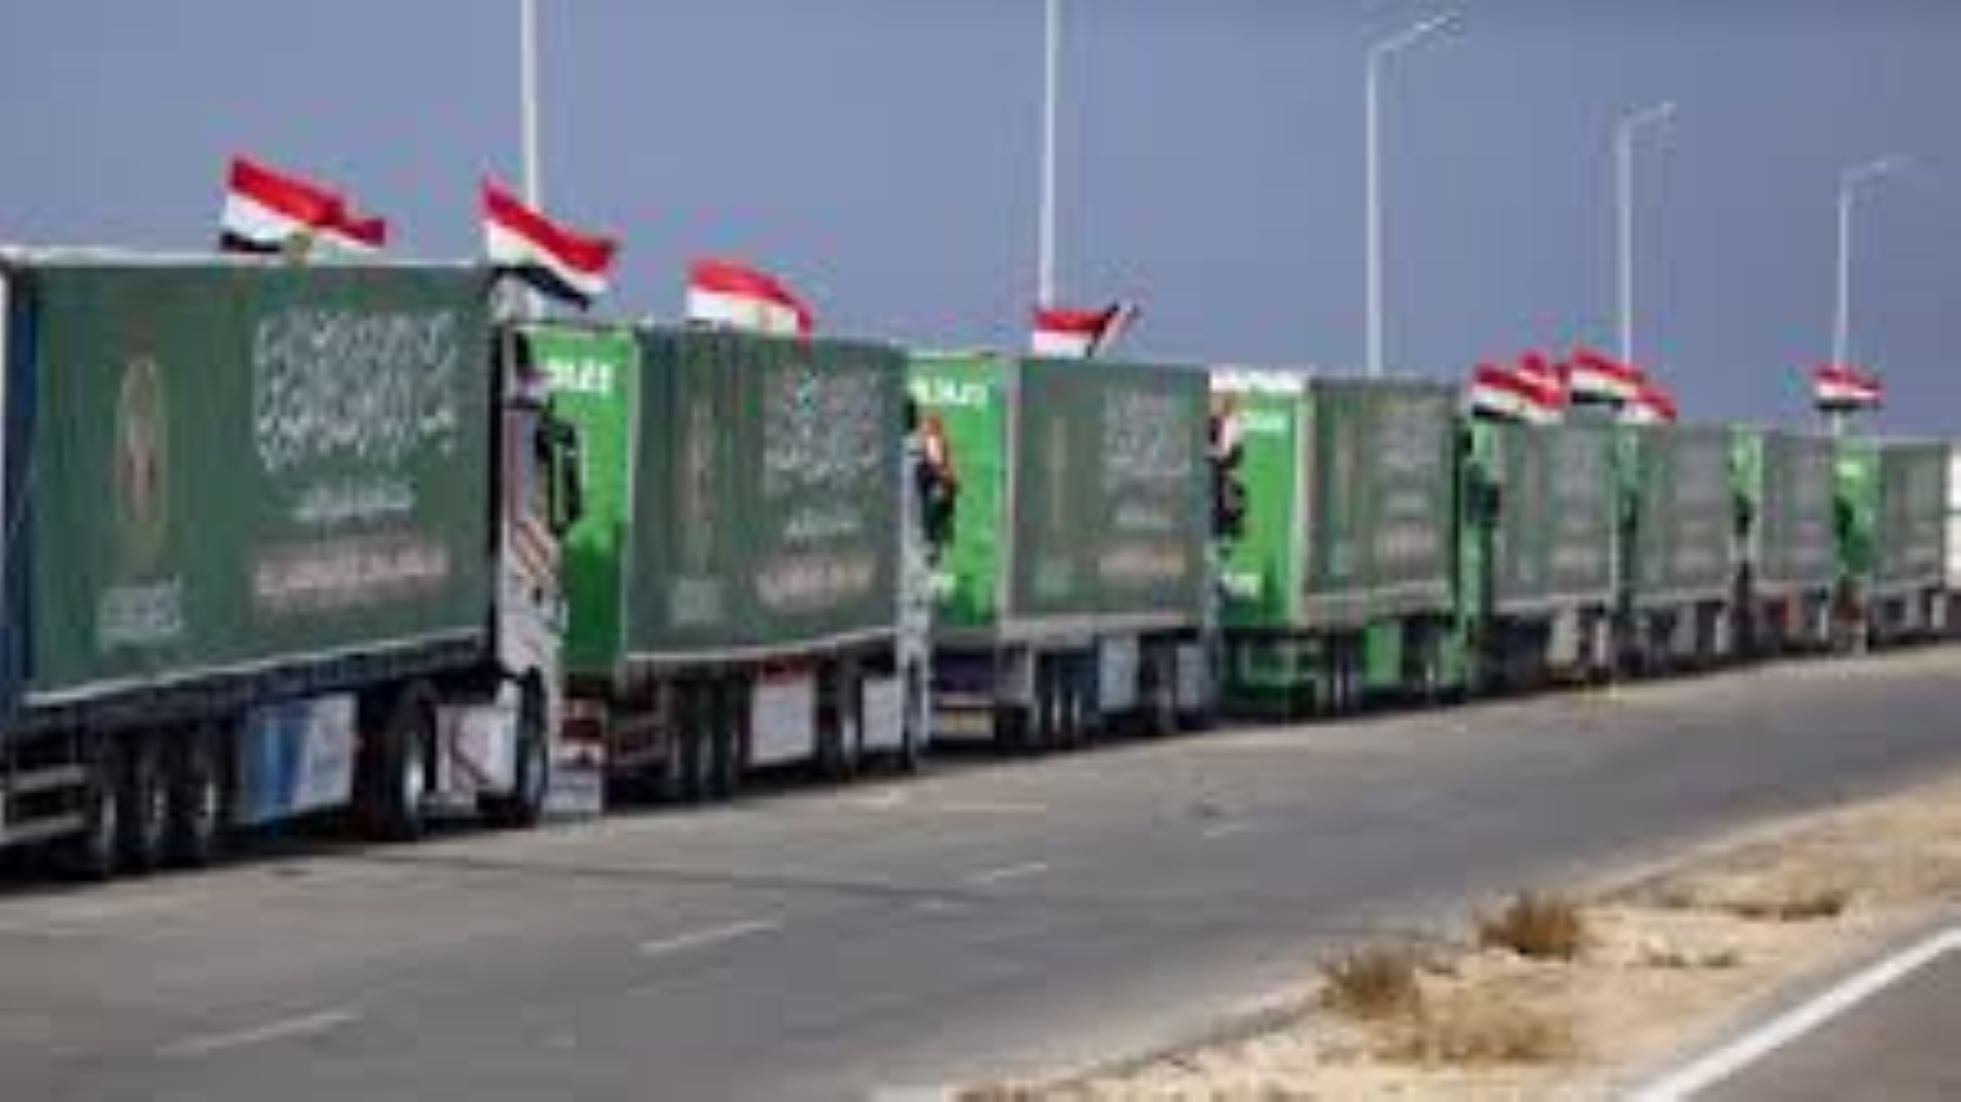 Egypt To Increase Number Of Aid Trucks To War-Torn Gaza